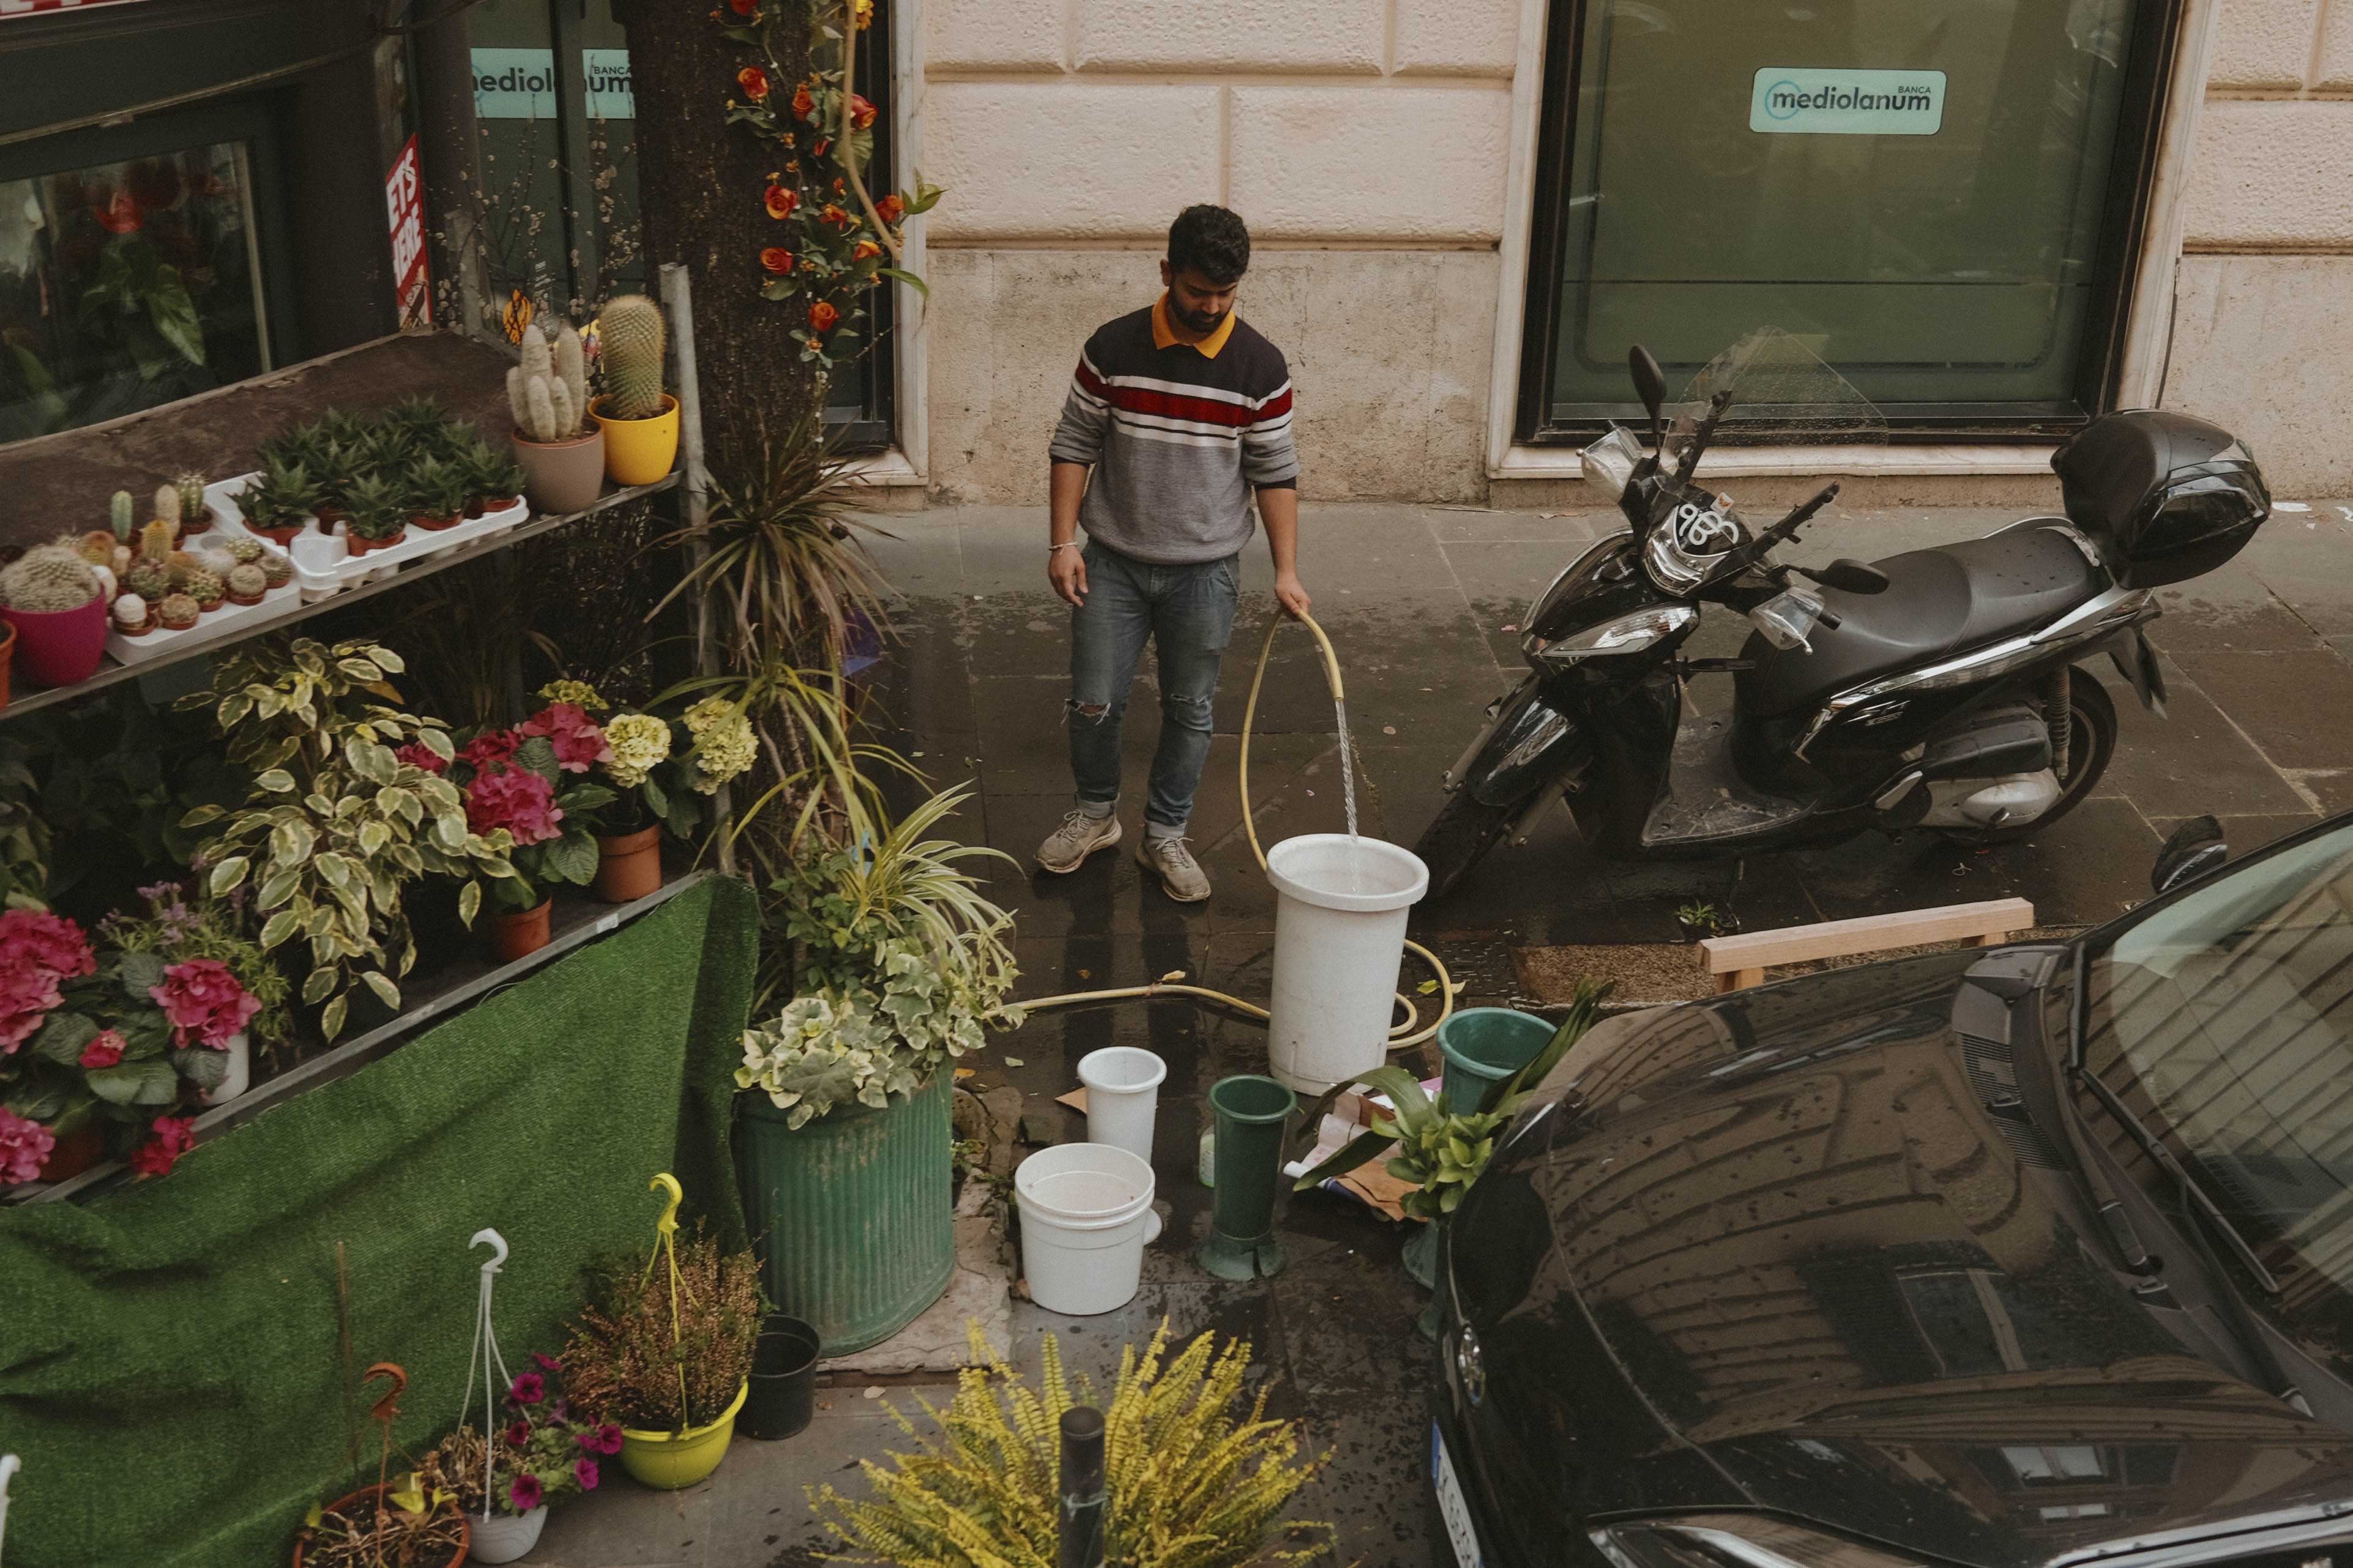 A man, working at a flower stand, filling a bucket of water with a hose